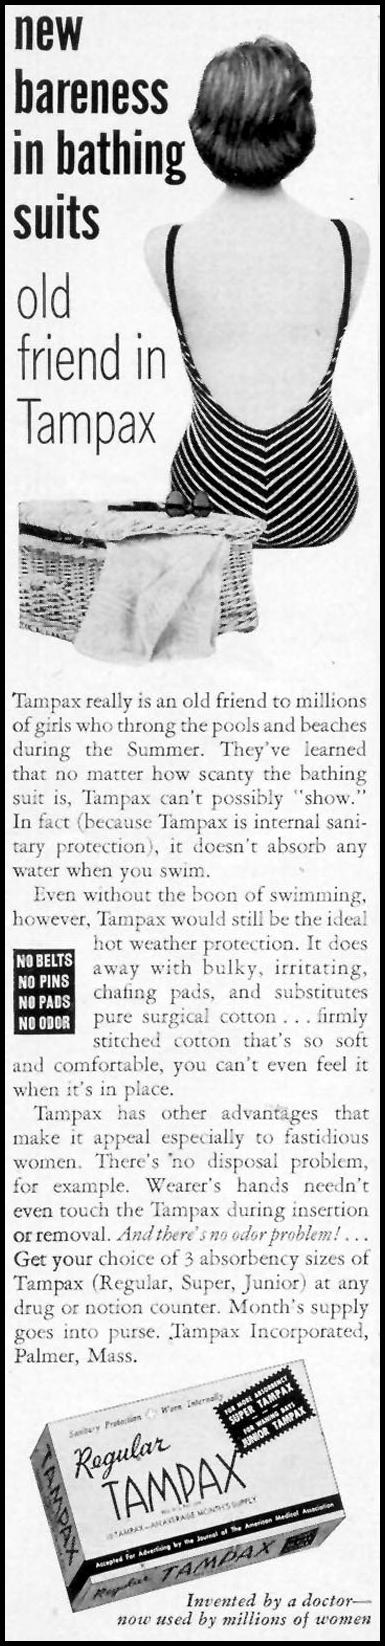 TAMPAX
WOMAN'S DAY
07/01/1955
p. 4